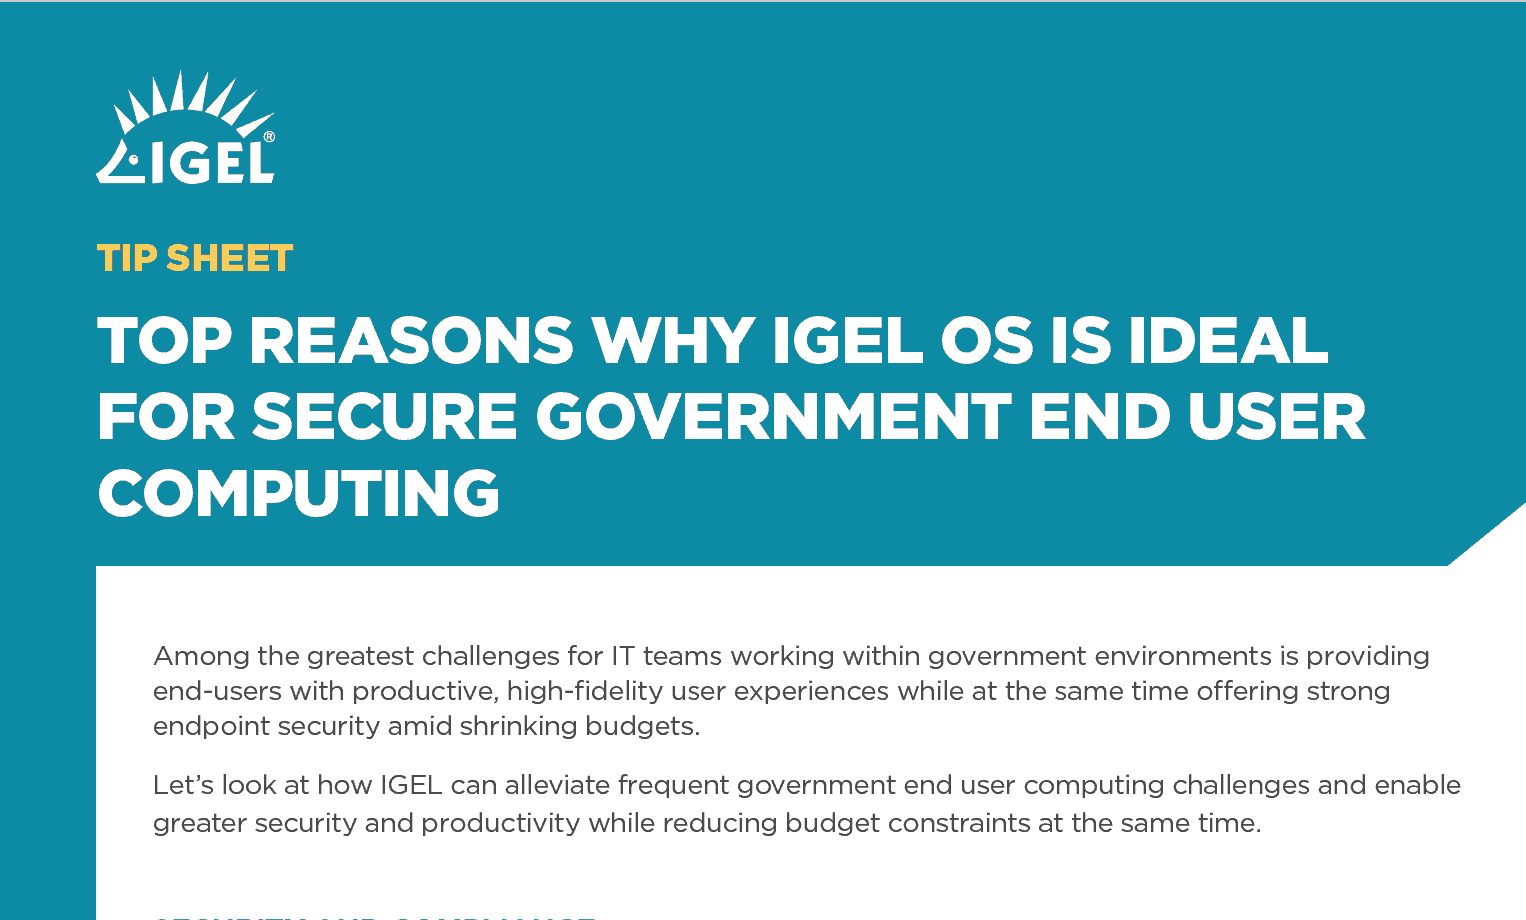 Top Reasons Why IGEL OS is Ideal for Secure Government End User Computing